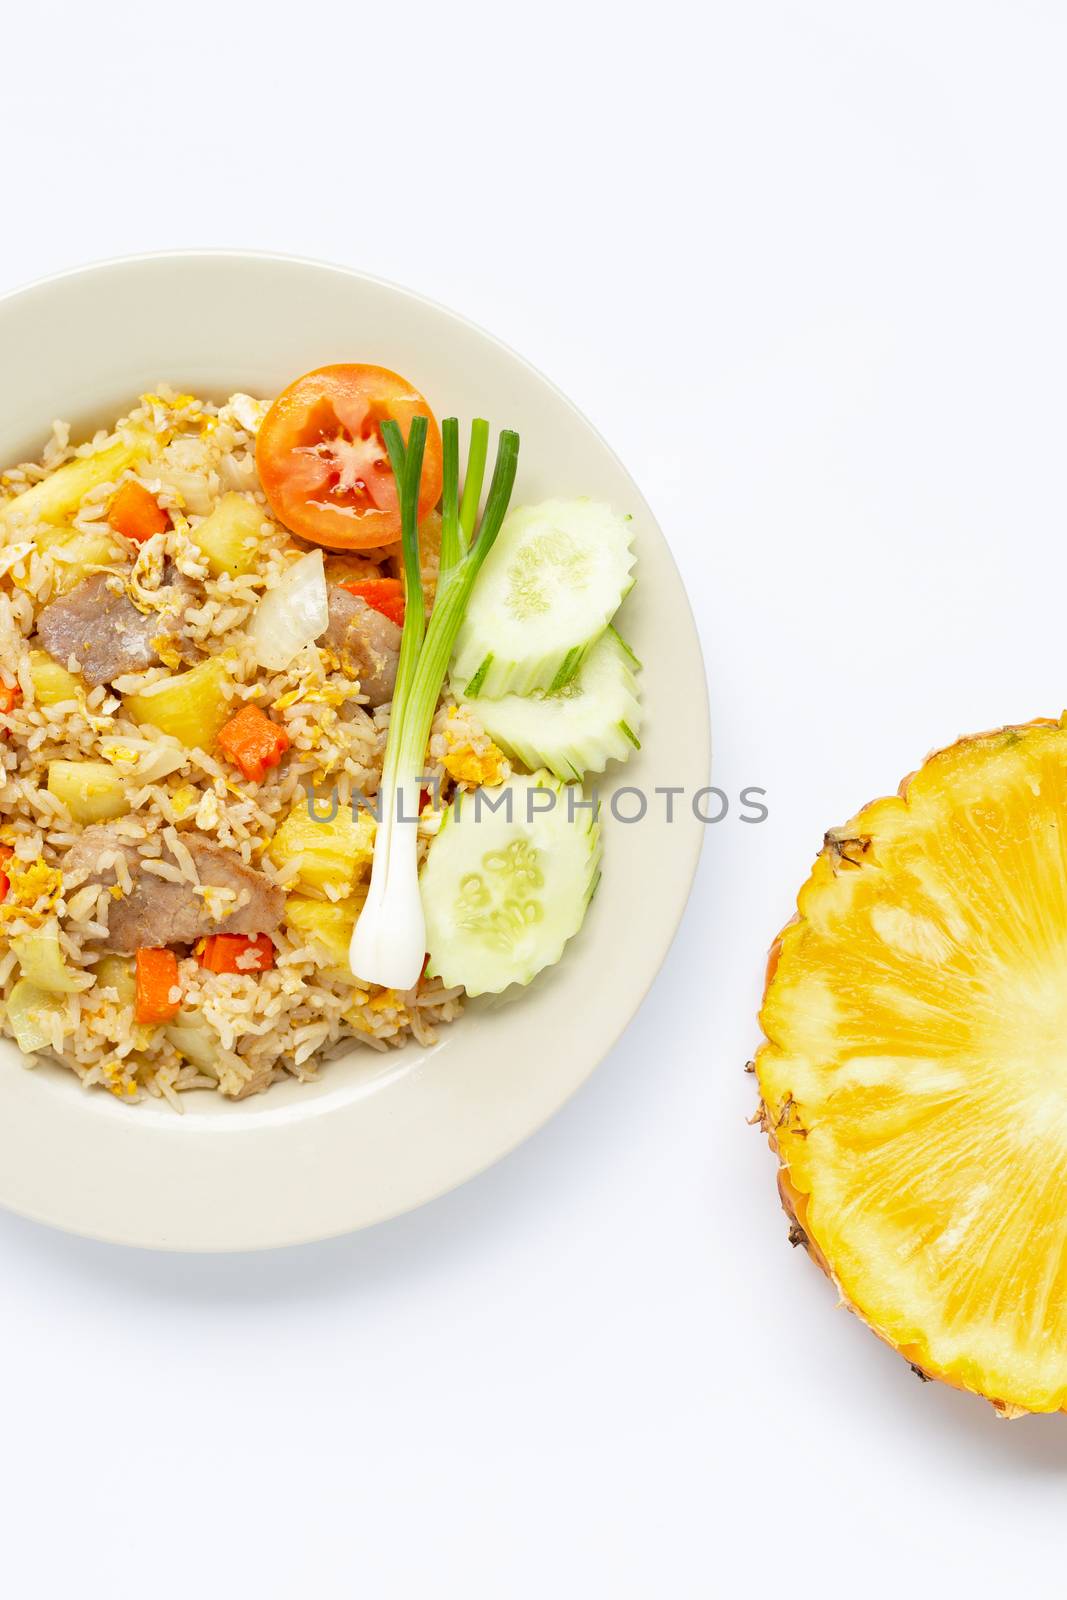 Pineapple fried rice with fresh pineapple slice on white background.